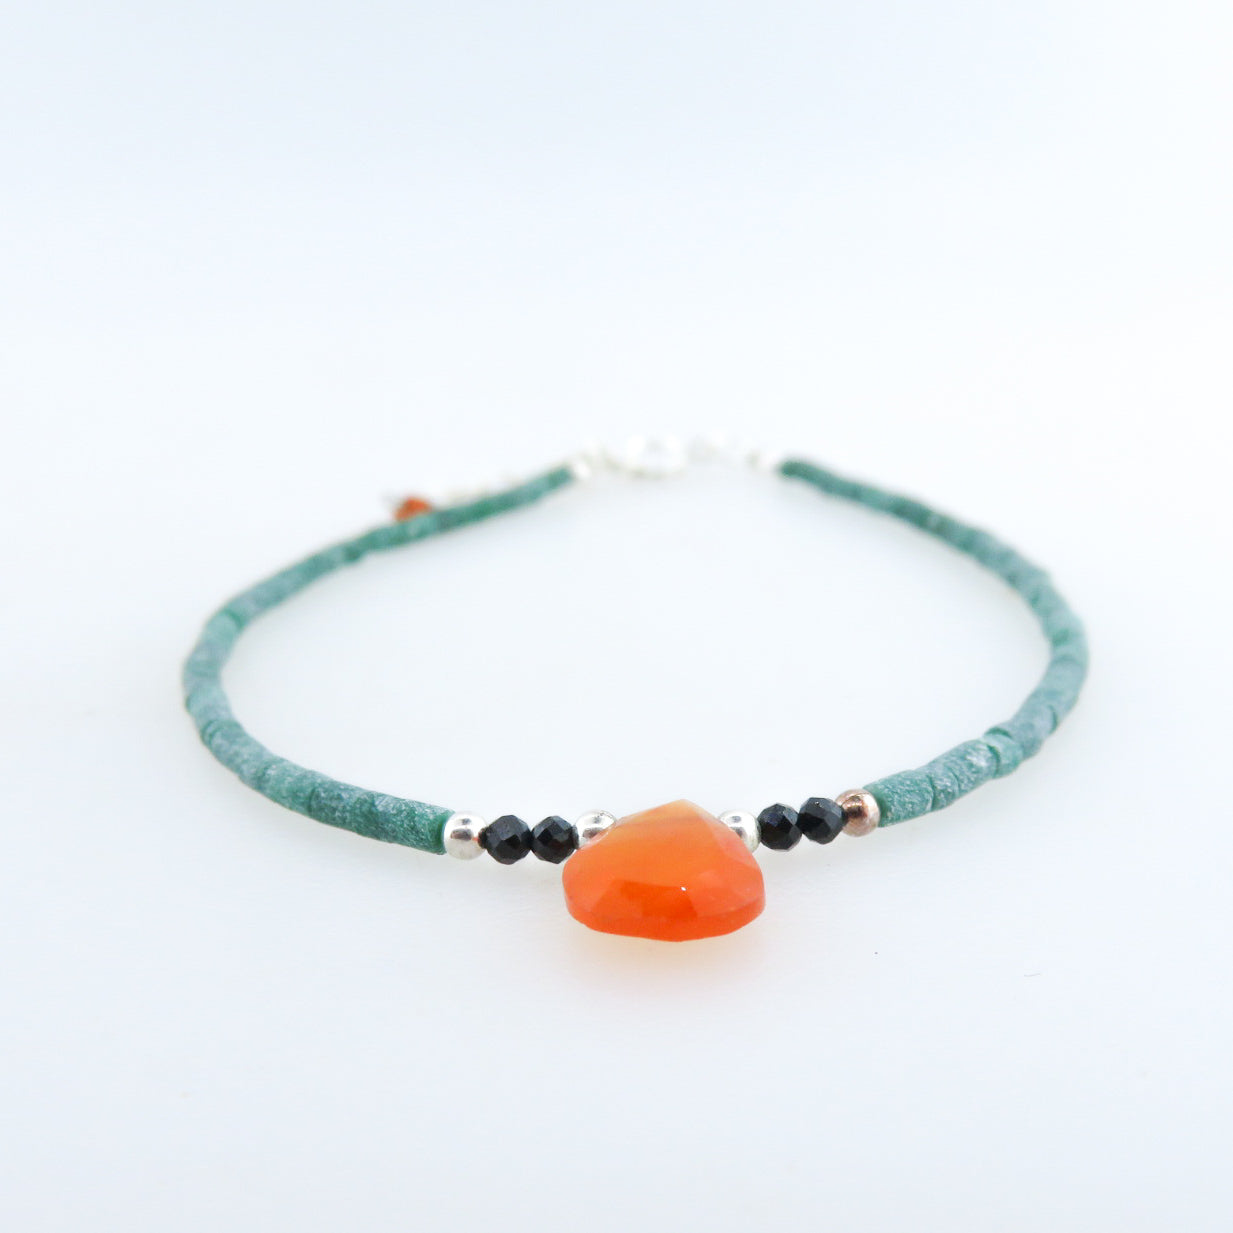 Emerald Bracelet with Carnelian, Black Onyx and Silver Beads